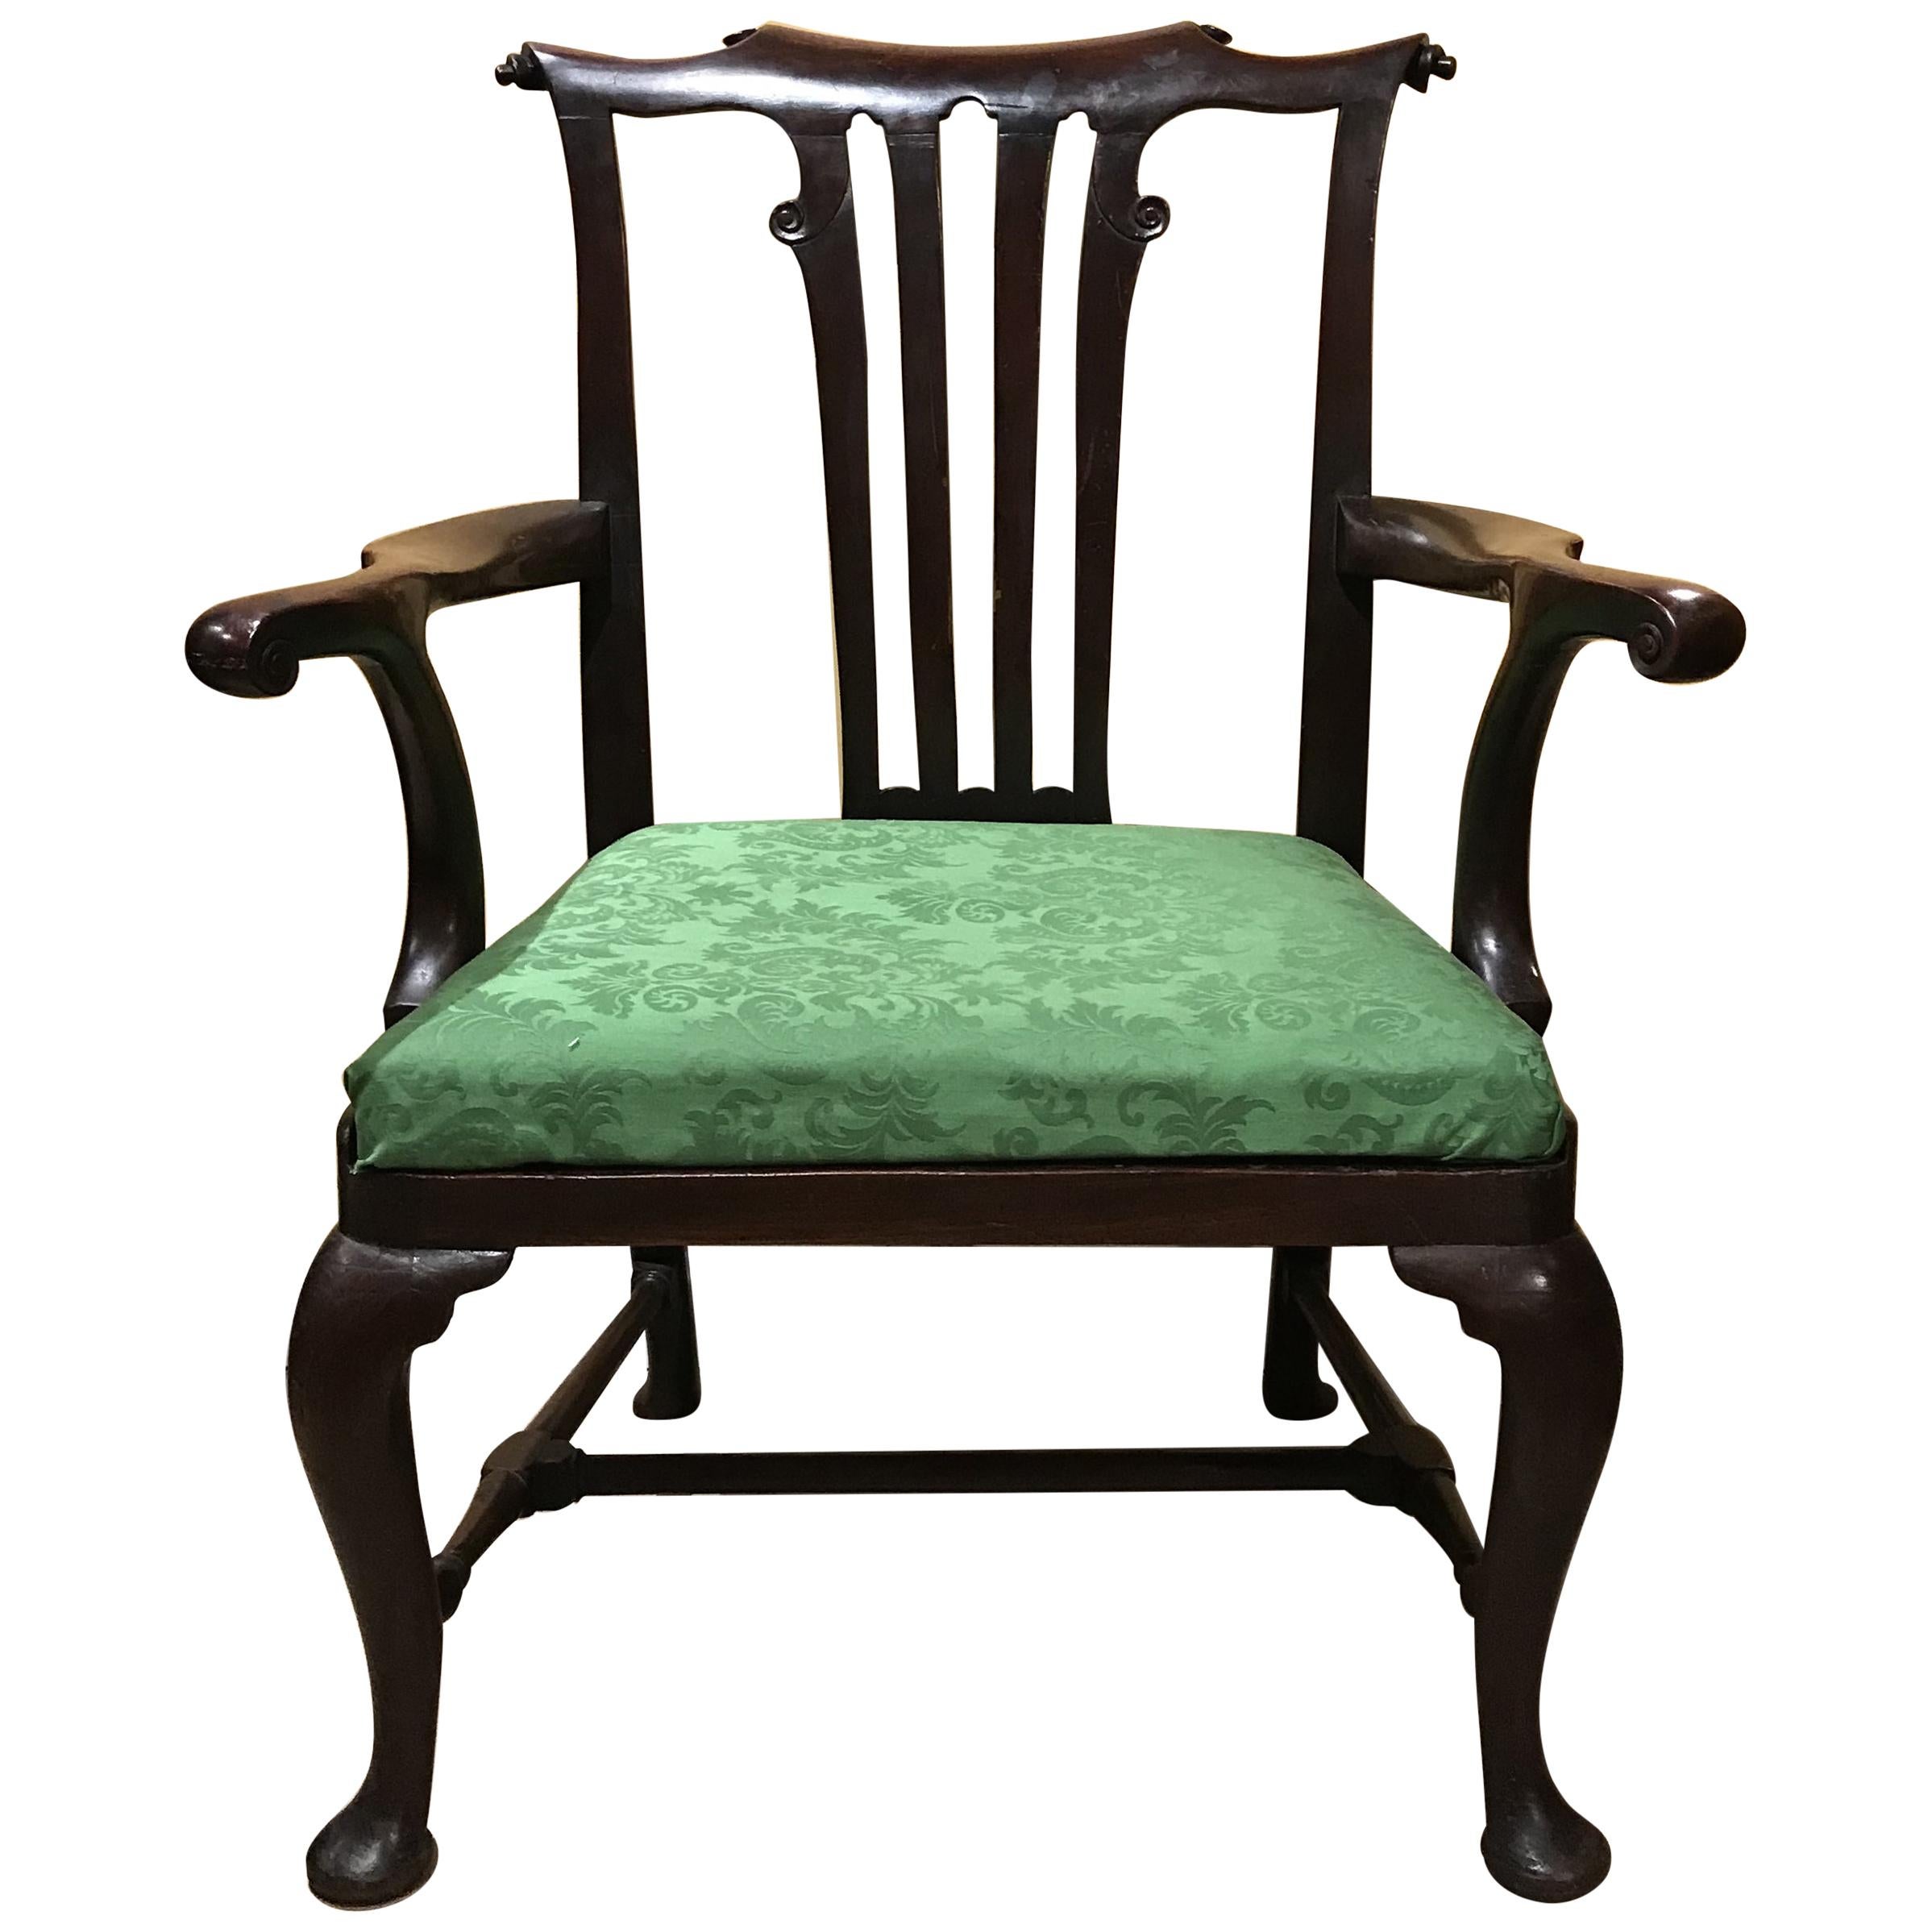 Mahogany Georgian Armchair with Scrolled Crest and Arms, circa 1750